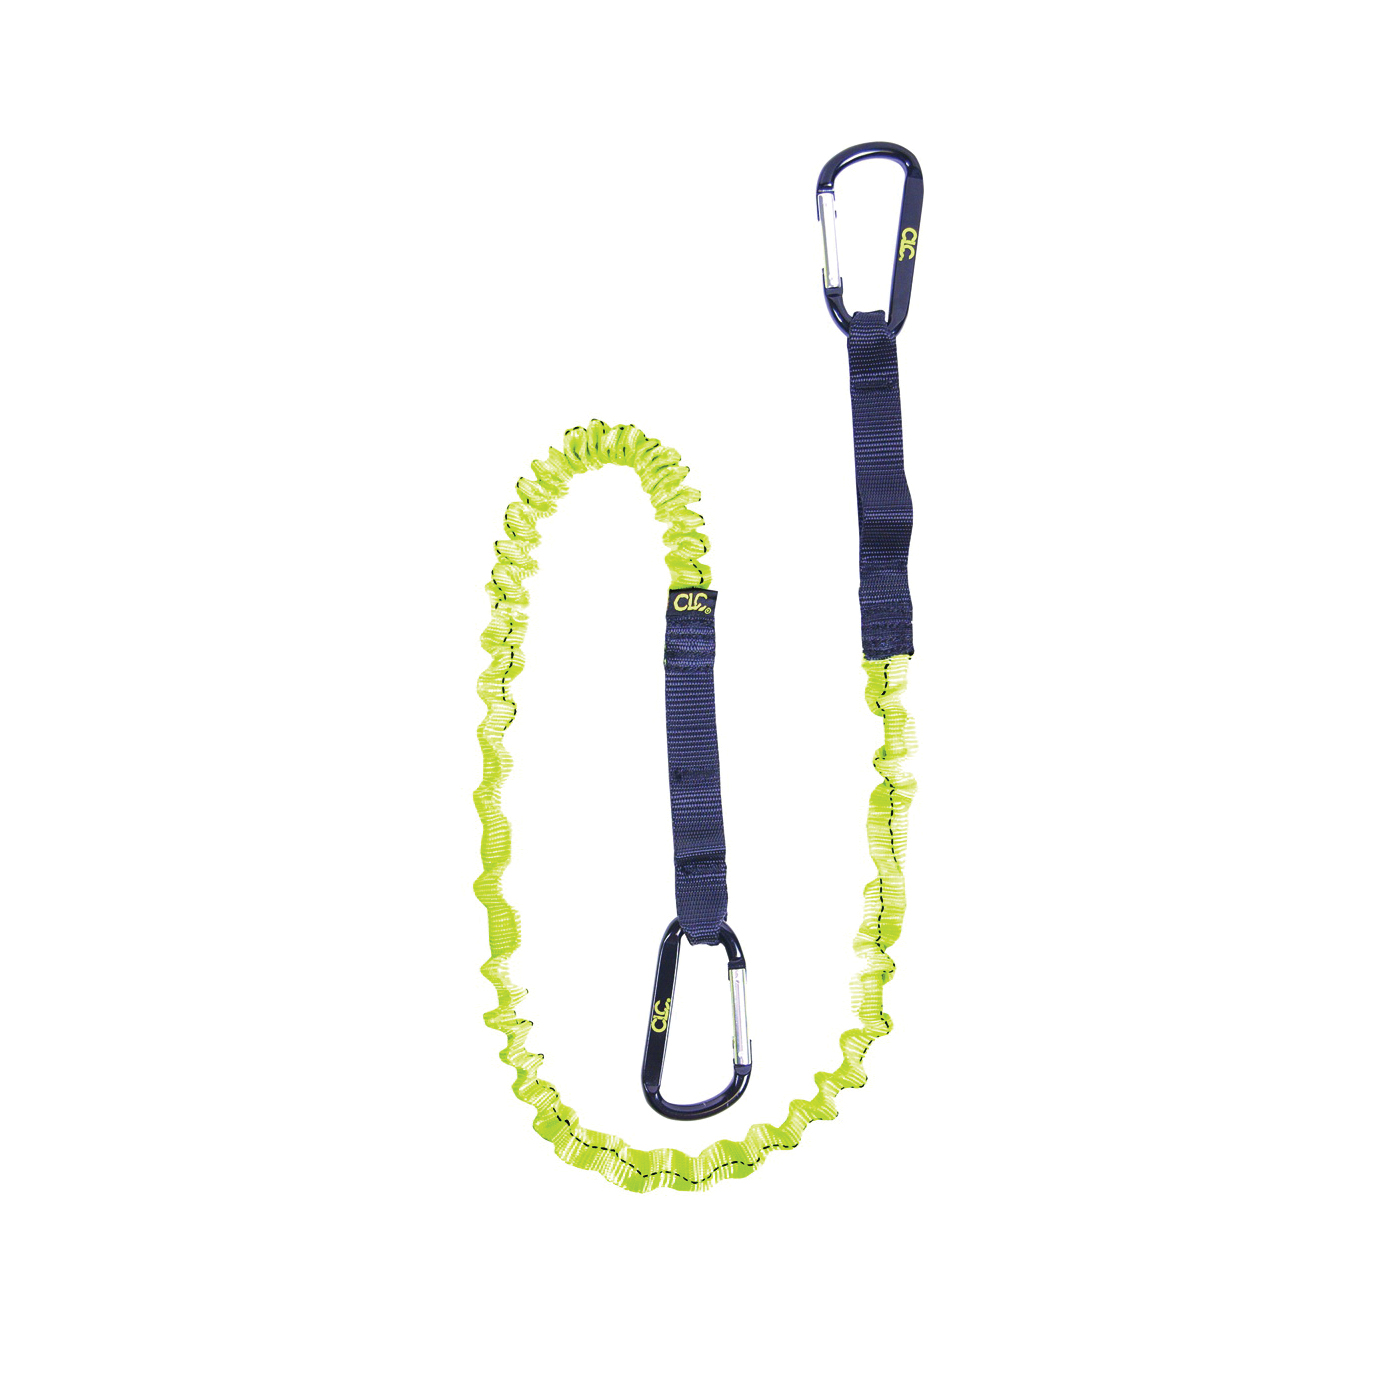 CLC GEAR LINK 1027 Tool Lanyard, 39 to 56 in L, 6 lb Working Load, Carabiner End Fitting - 1